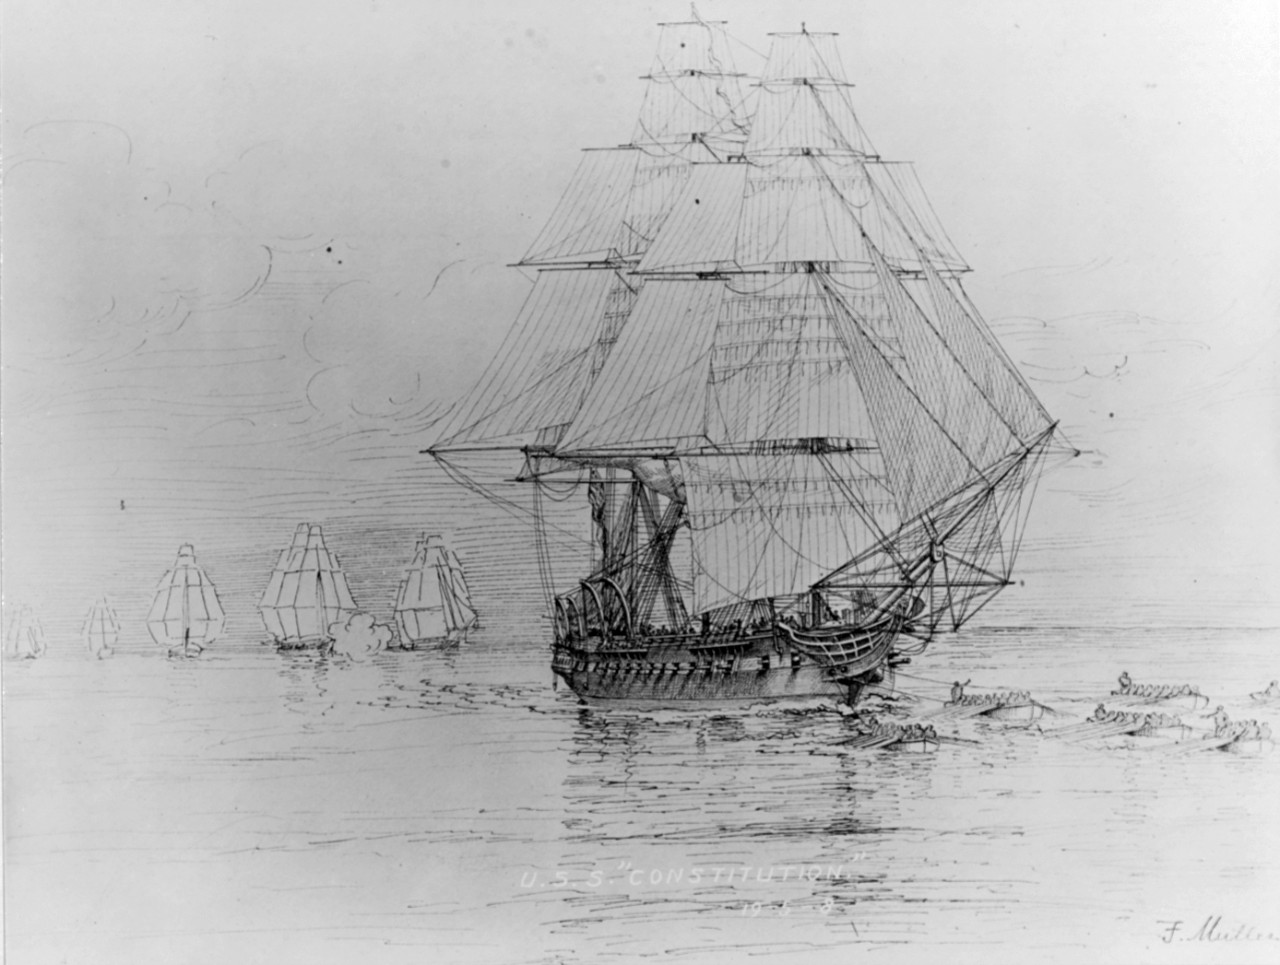 Photo #: NH 56778  USS Constitution's escape from a British squadron, July 1812